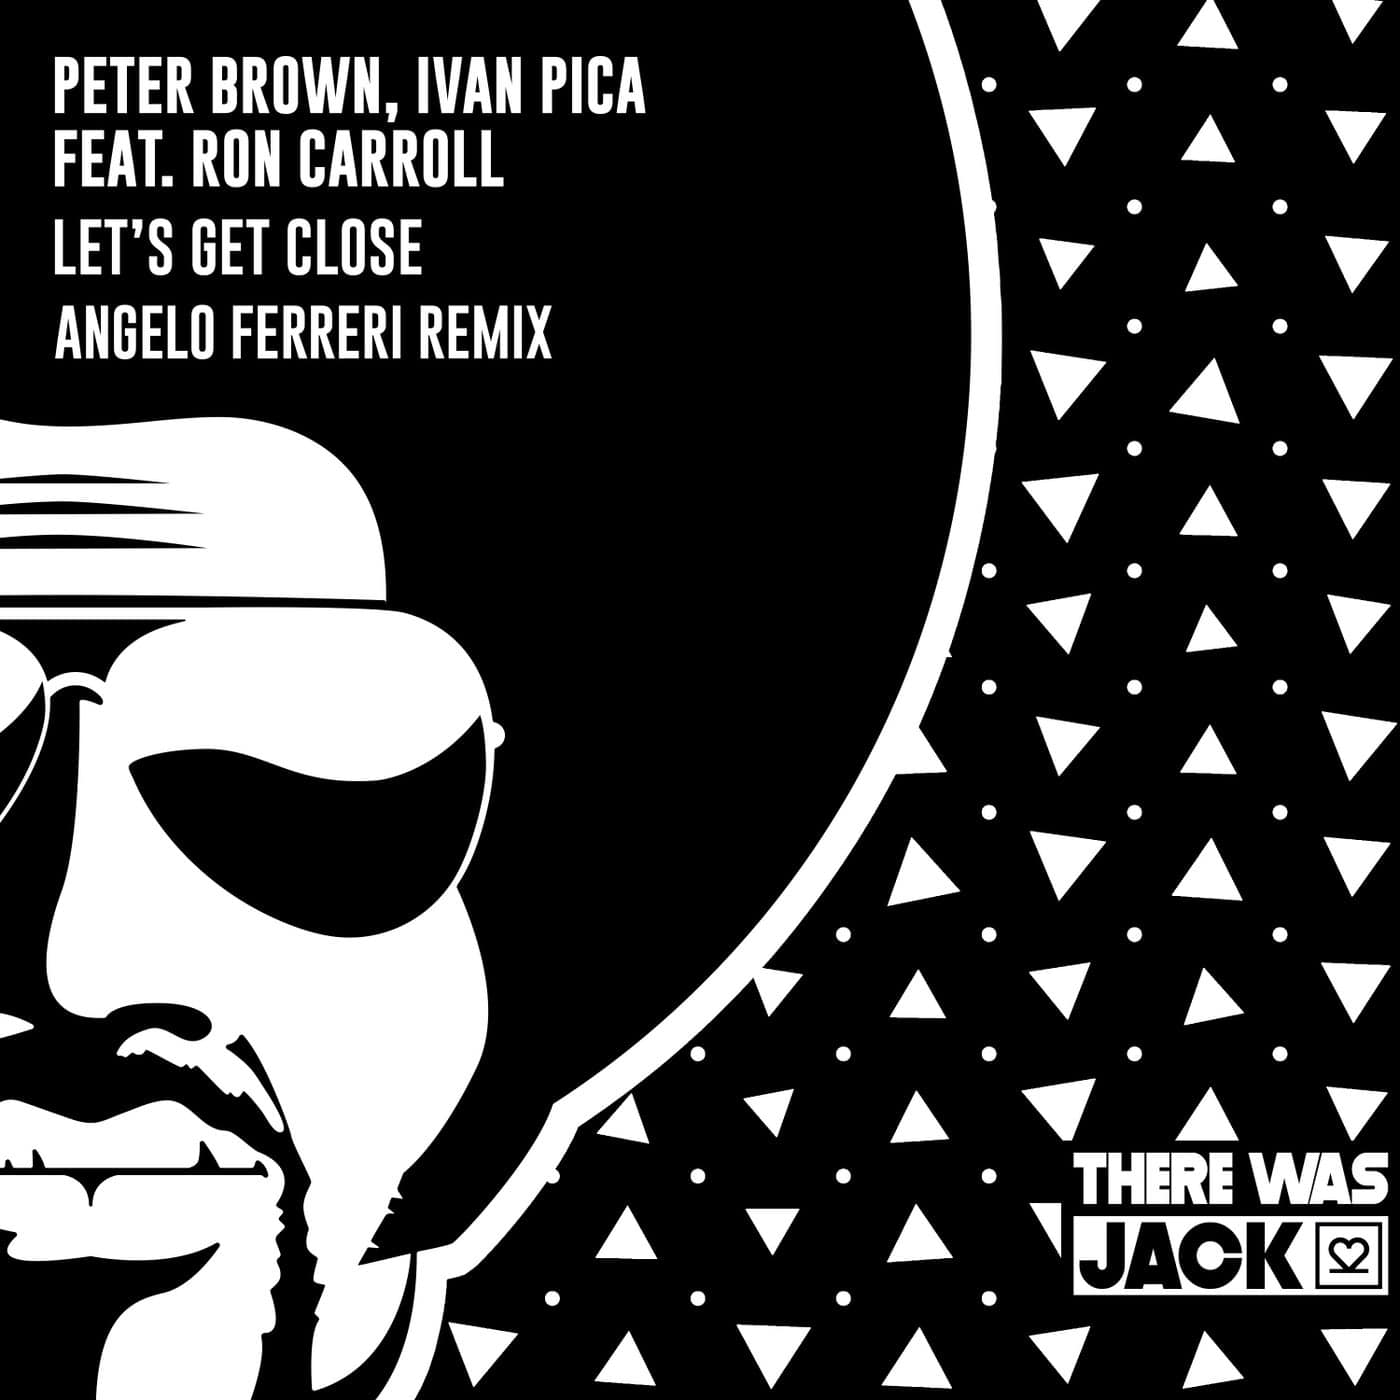 image cover: Let's Get Close (Angelo Ferreri Extended Remix) by Ron Carroll, Peter Brown, Ivan Pica on There Was Jack